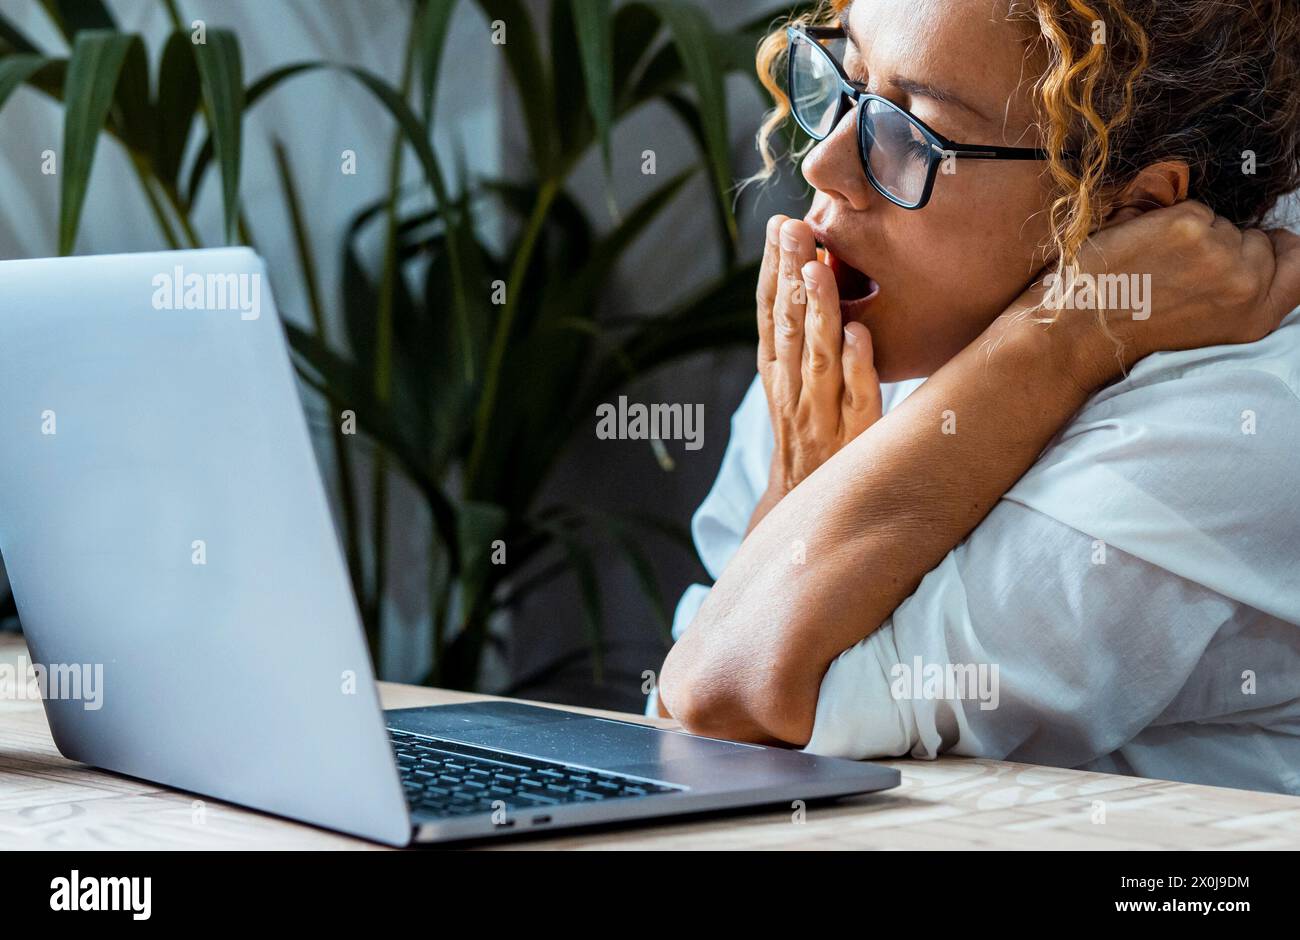 One woman doing yawn for tired and bored condition in front of an open laptop at the desk. Smart working online business and freelance lifestyle. Exhausted female people overwork use computer office Stock Photo